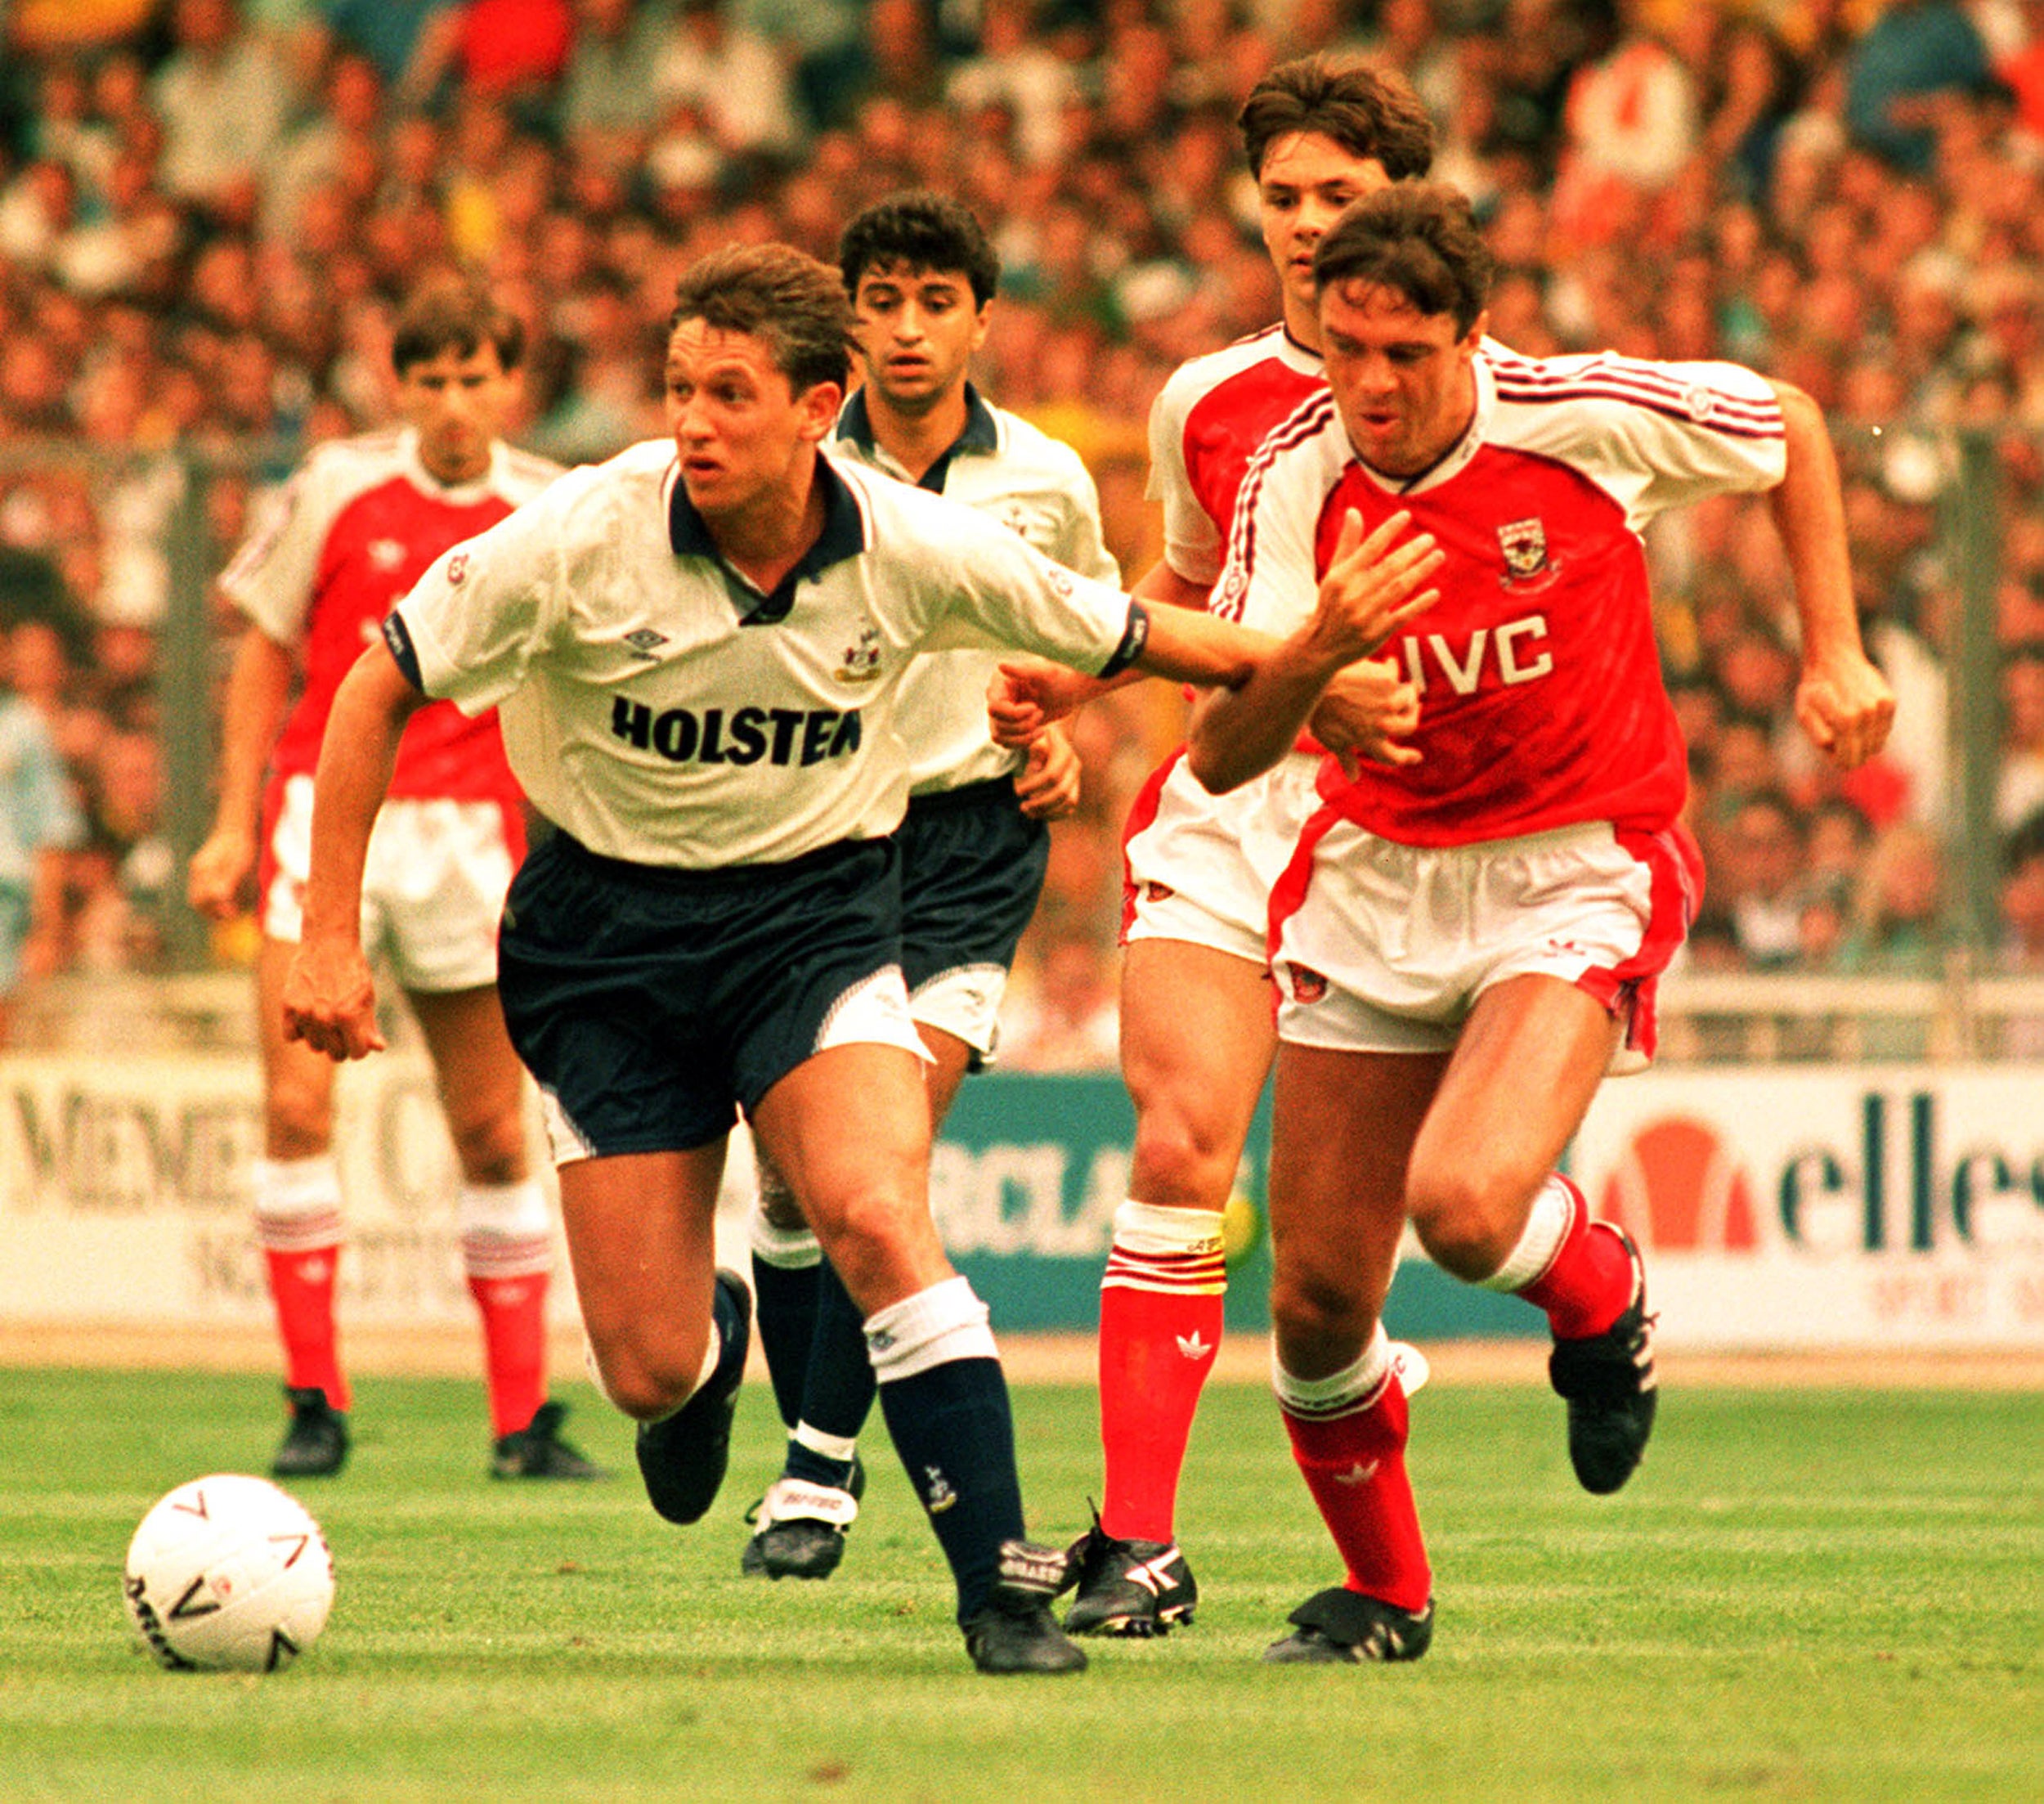 Tottenham's Gary Lineker races away from Arsenal's David O'Leary during the 1991 Charity Shield match